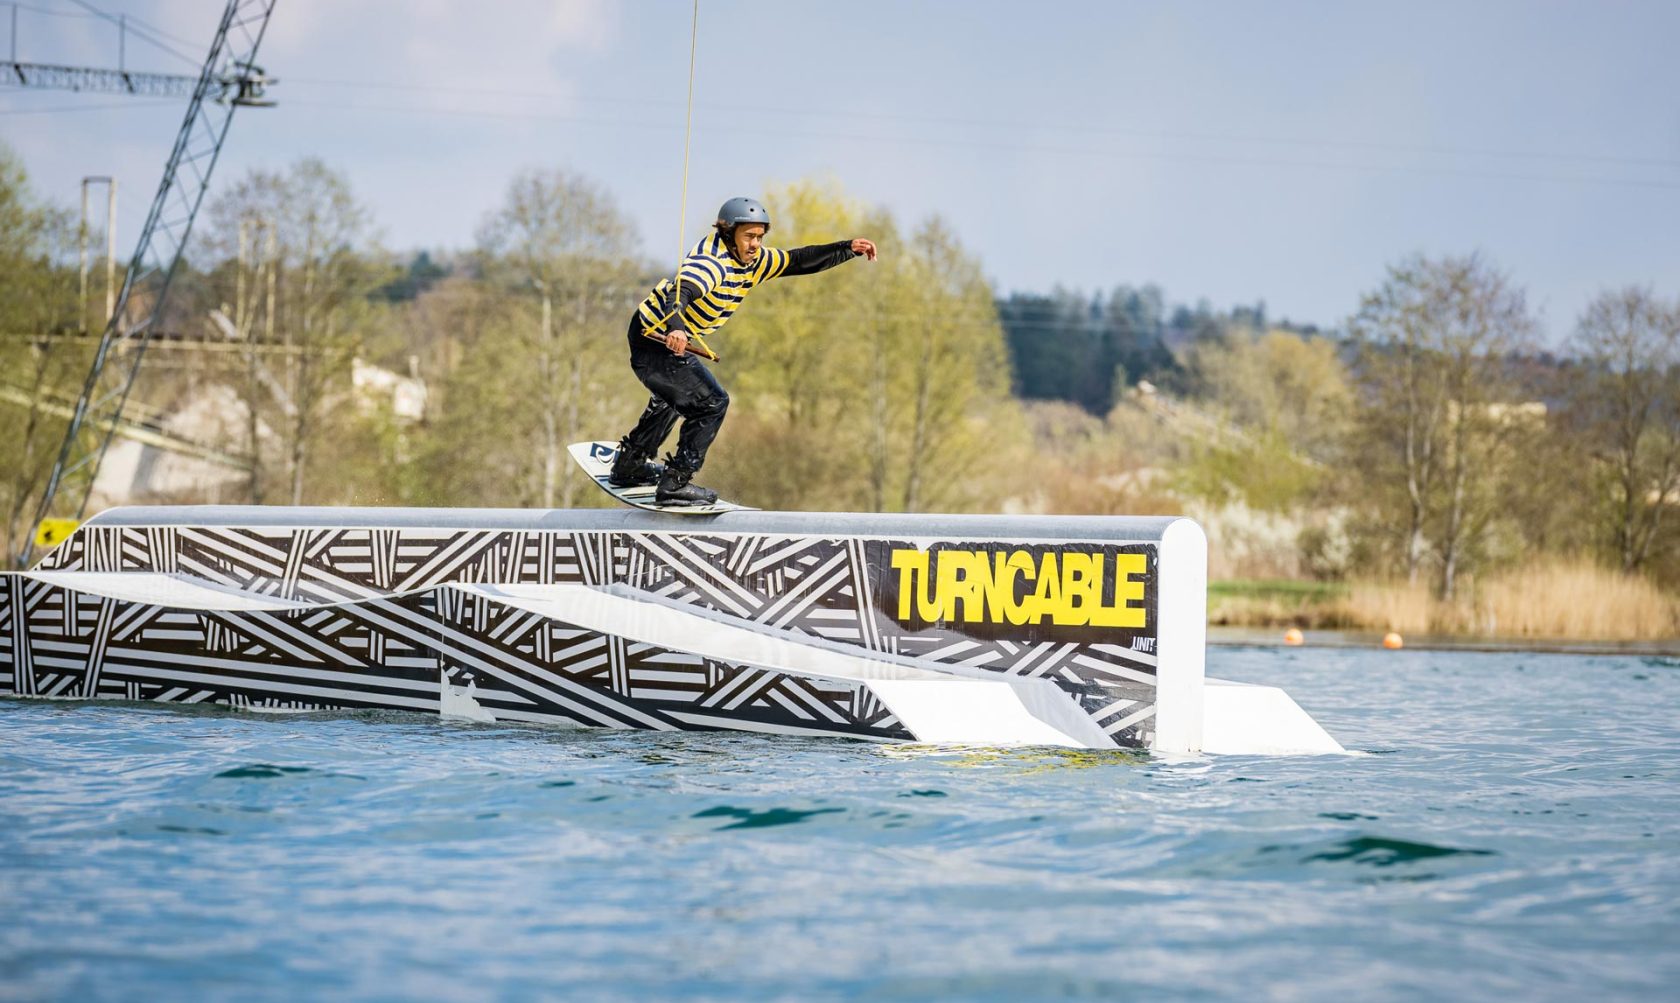 Tech Series - For creative wakeboarding - UNIT Parktech